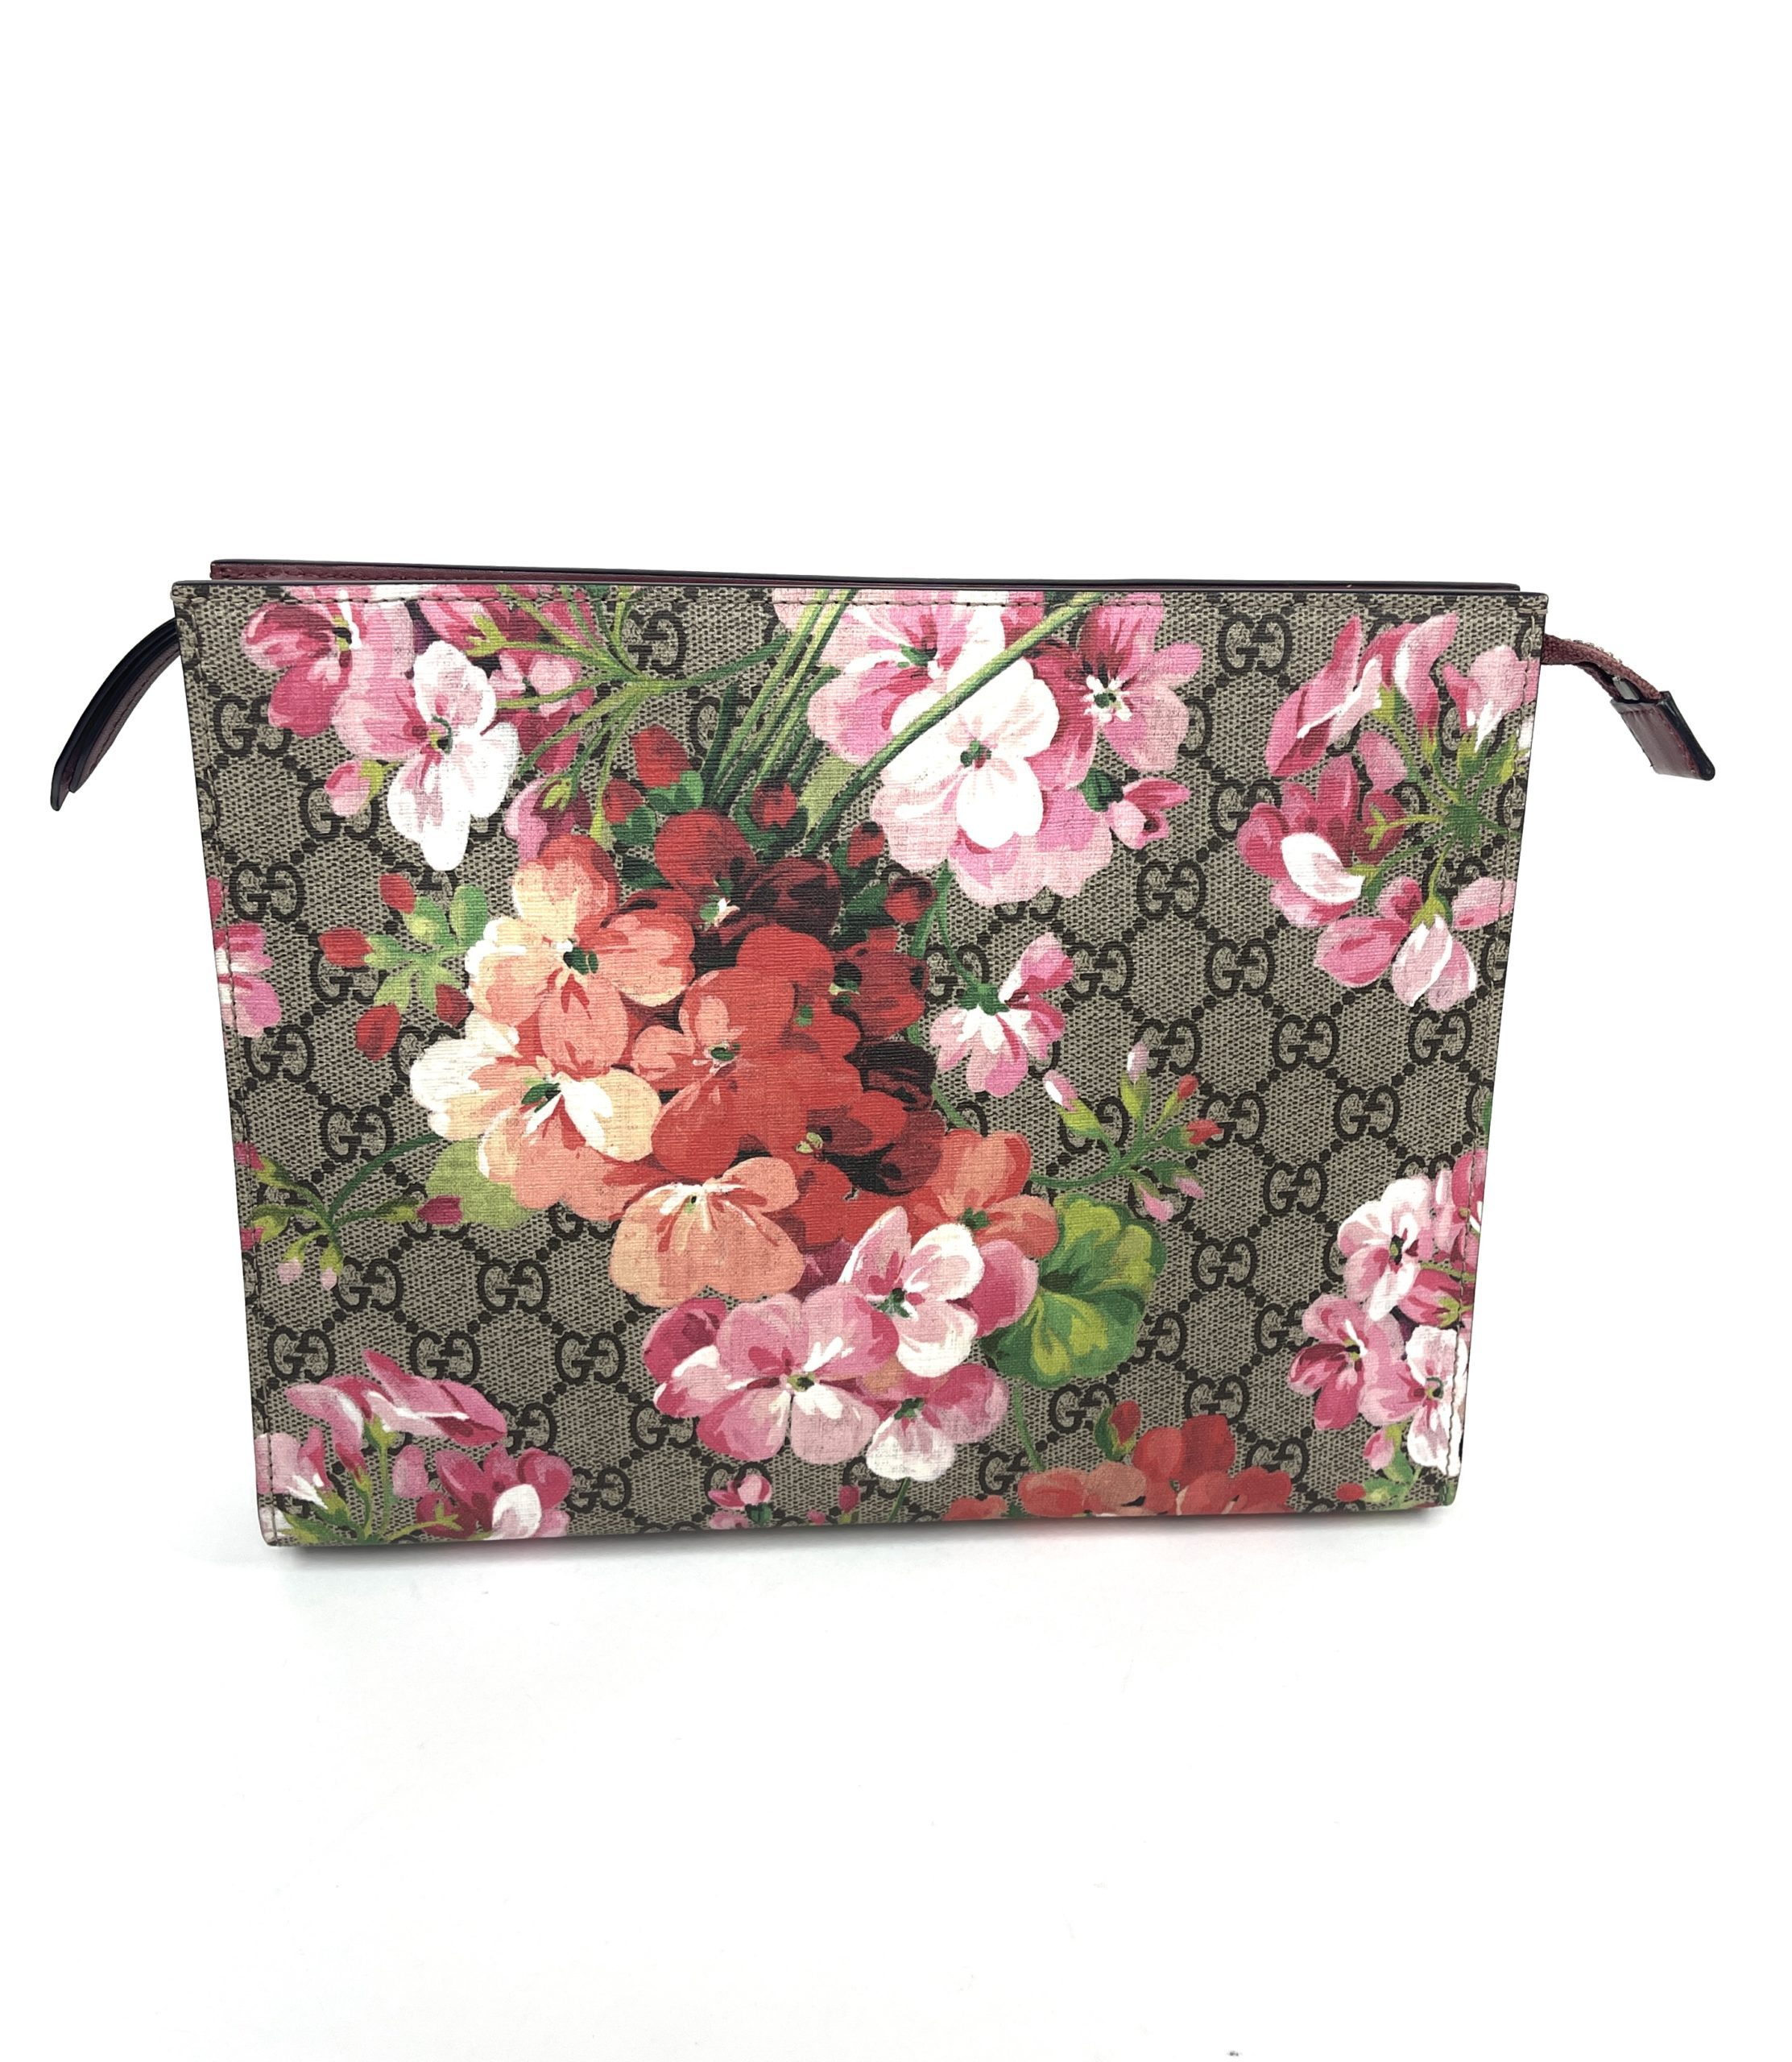 Gucci GG Supreme Guccissima Pink Blooms Print Floral Leather Clutch Pouch  Bag 